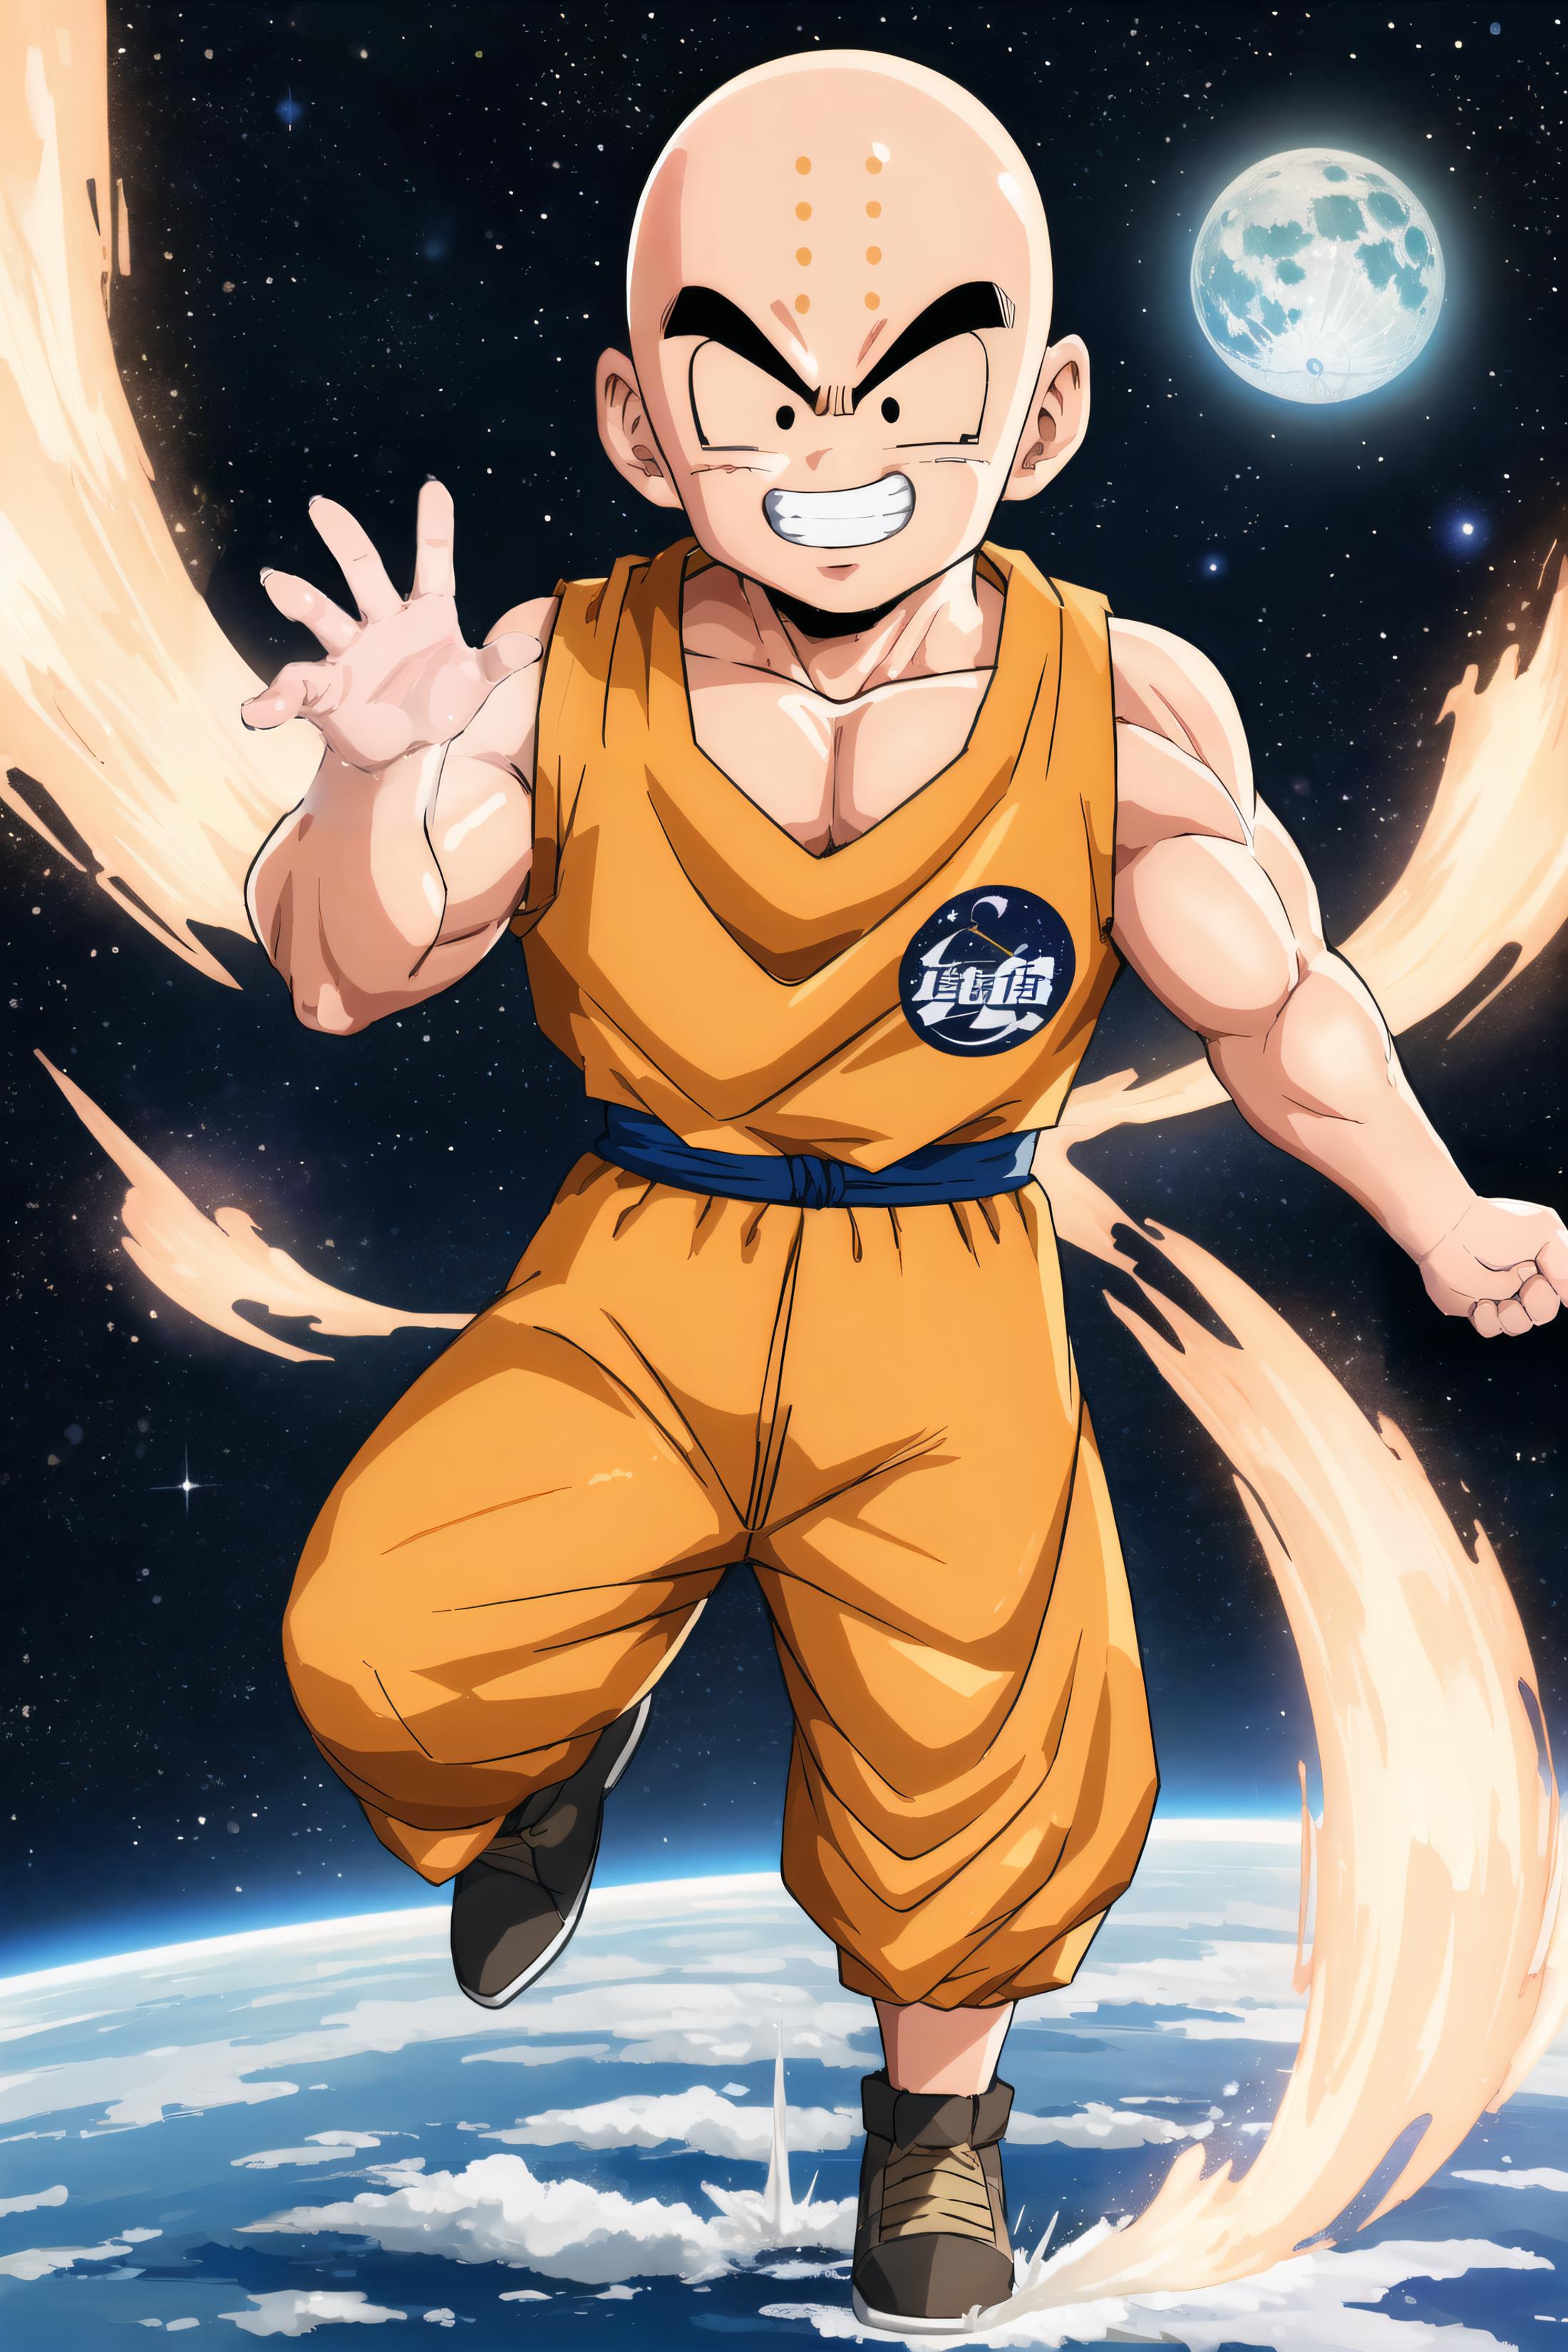 krillin (Dragon ball Z) image by twoundead